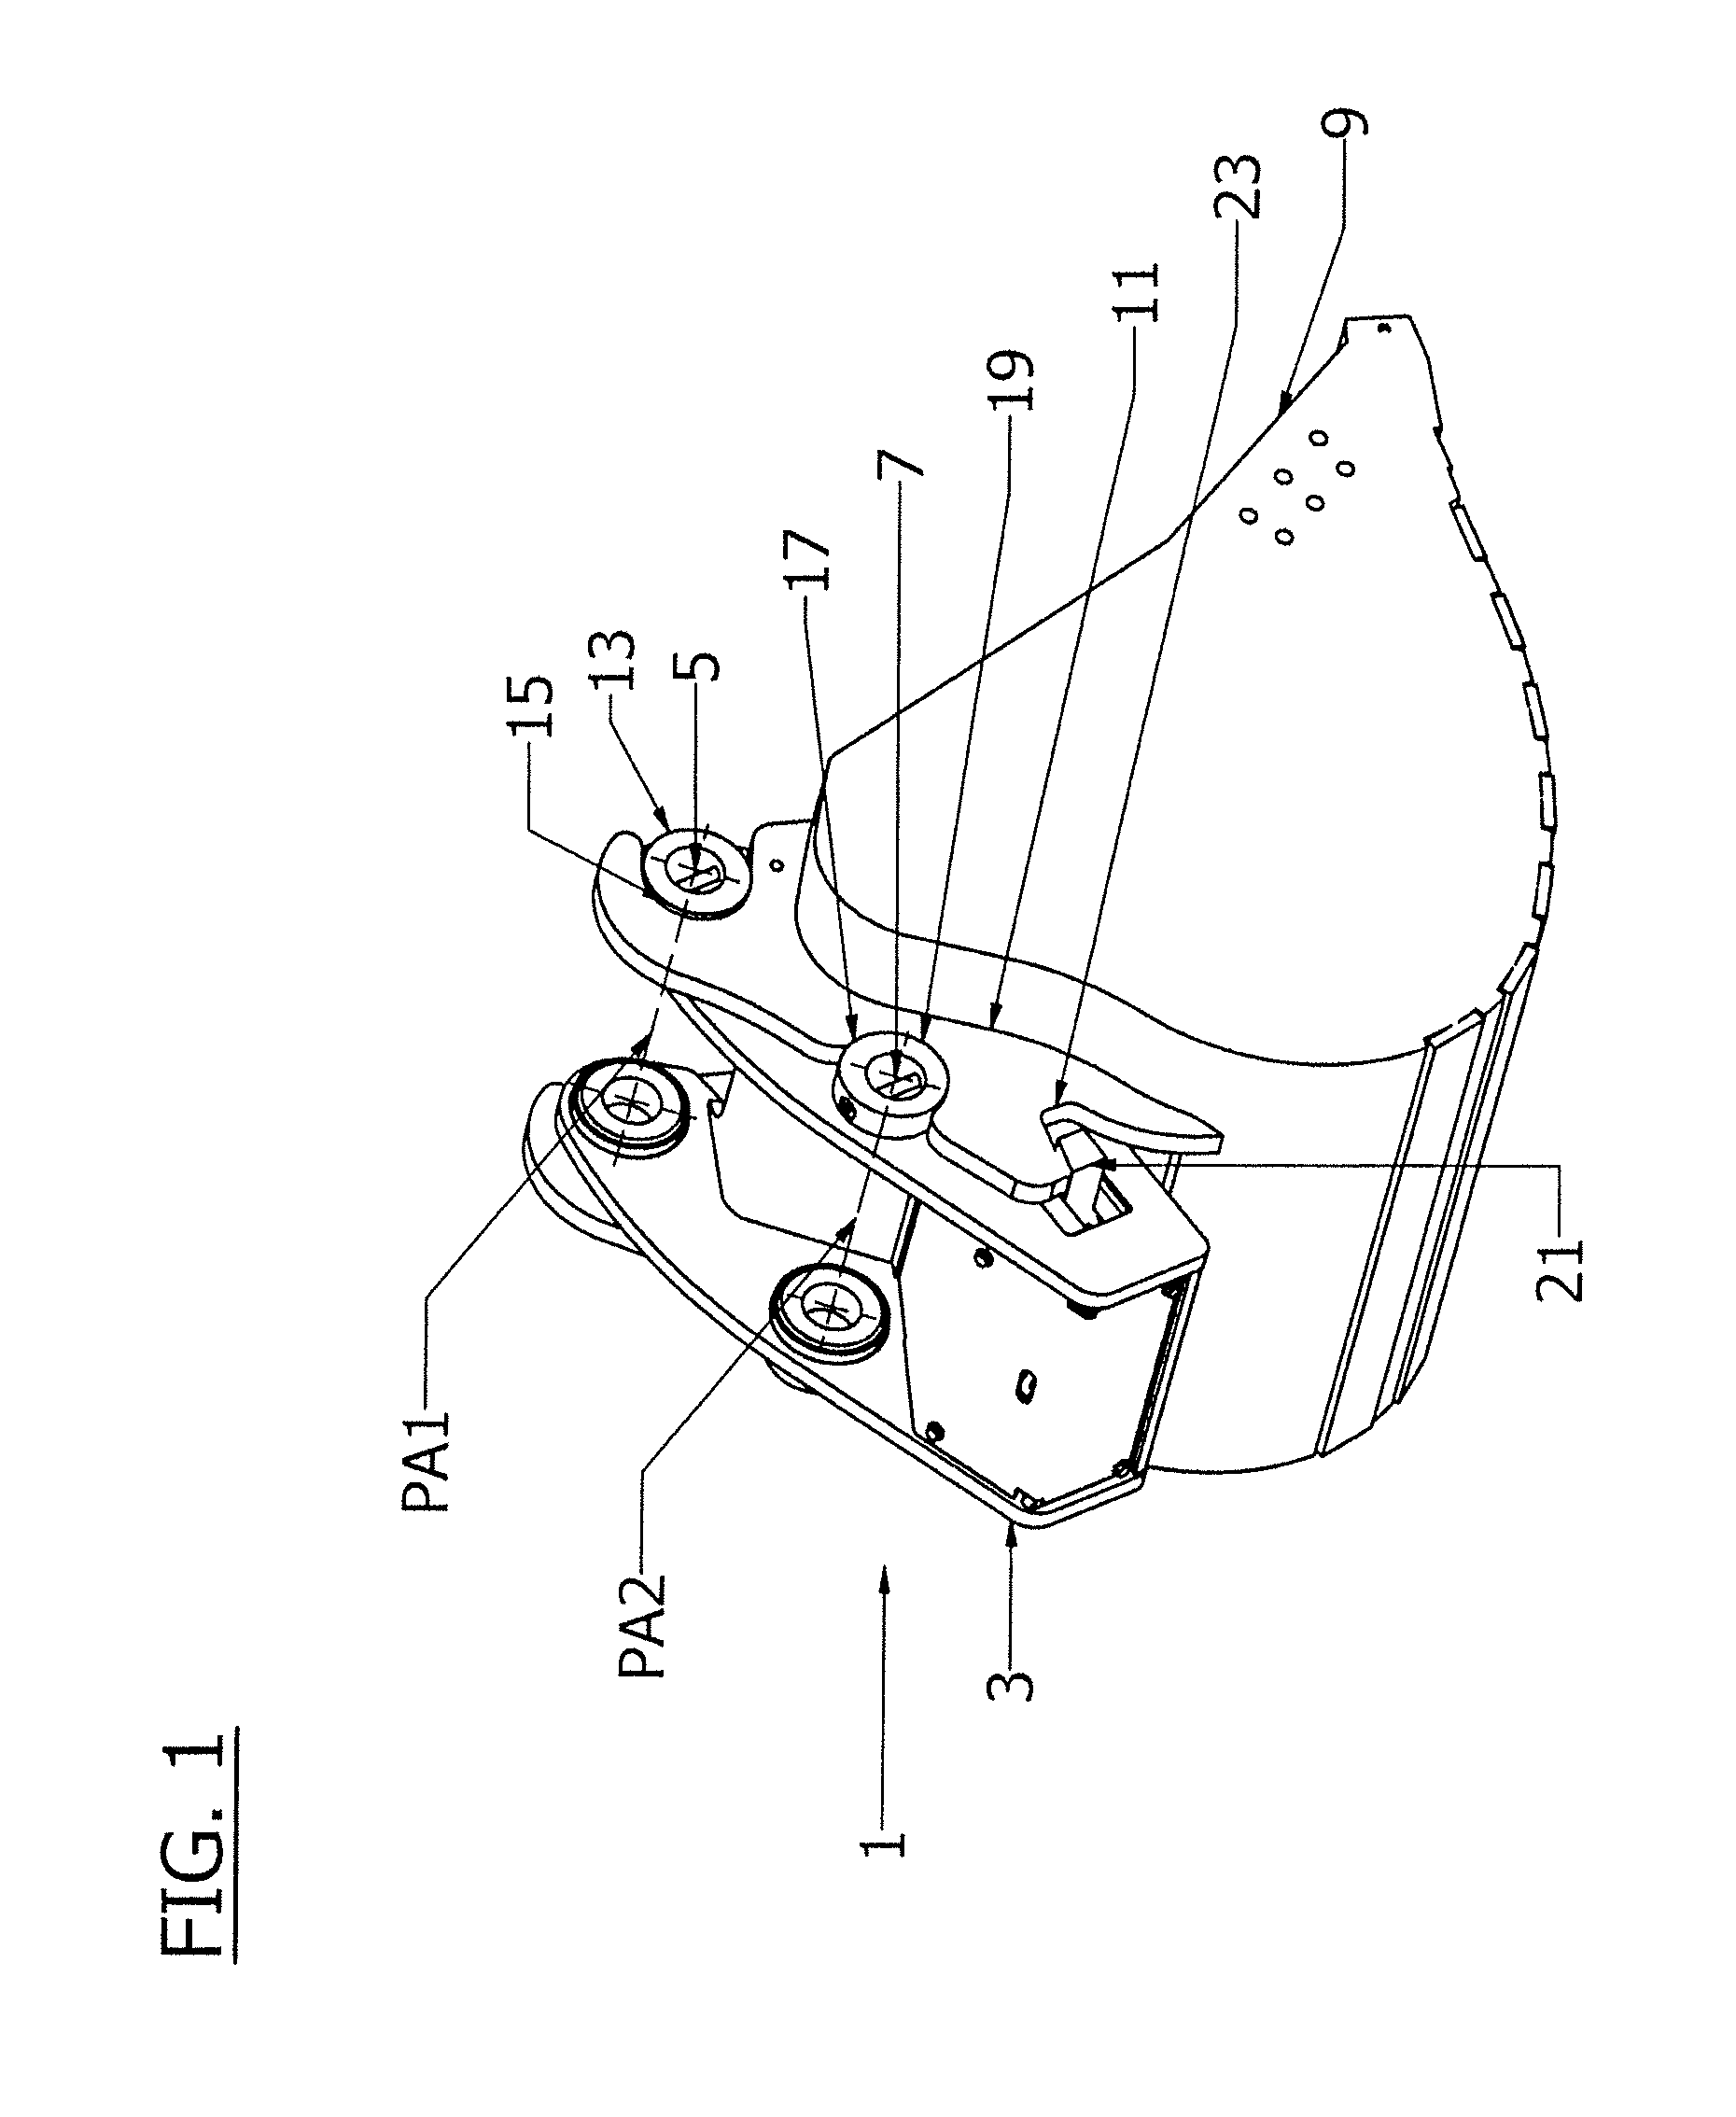 Compact quick coupling mechanism for tool attachment